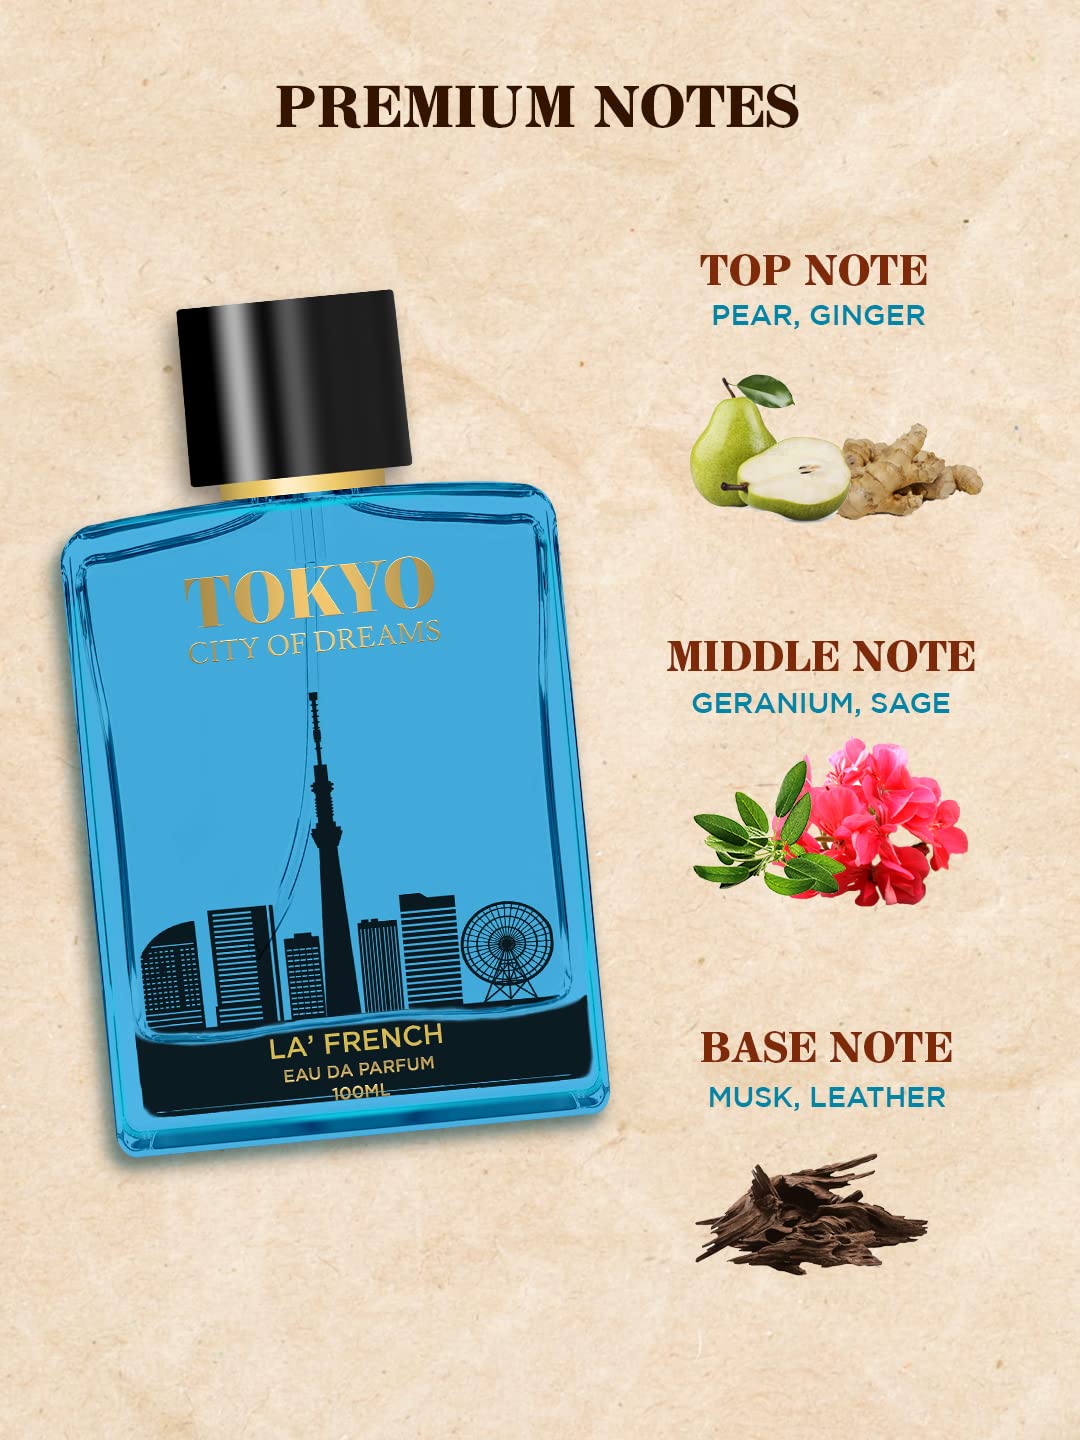 La french Tokyo Perfume for Men - 100ml | Luxury Gift | Extra Long Lasting Smell | Premium French Fragrance Scent | Eau De Parfum